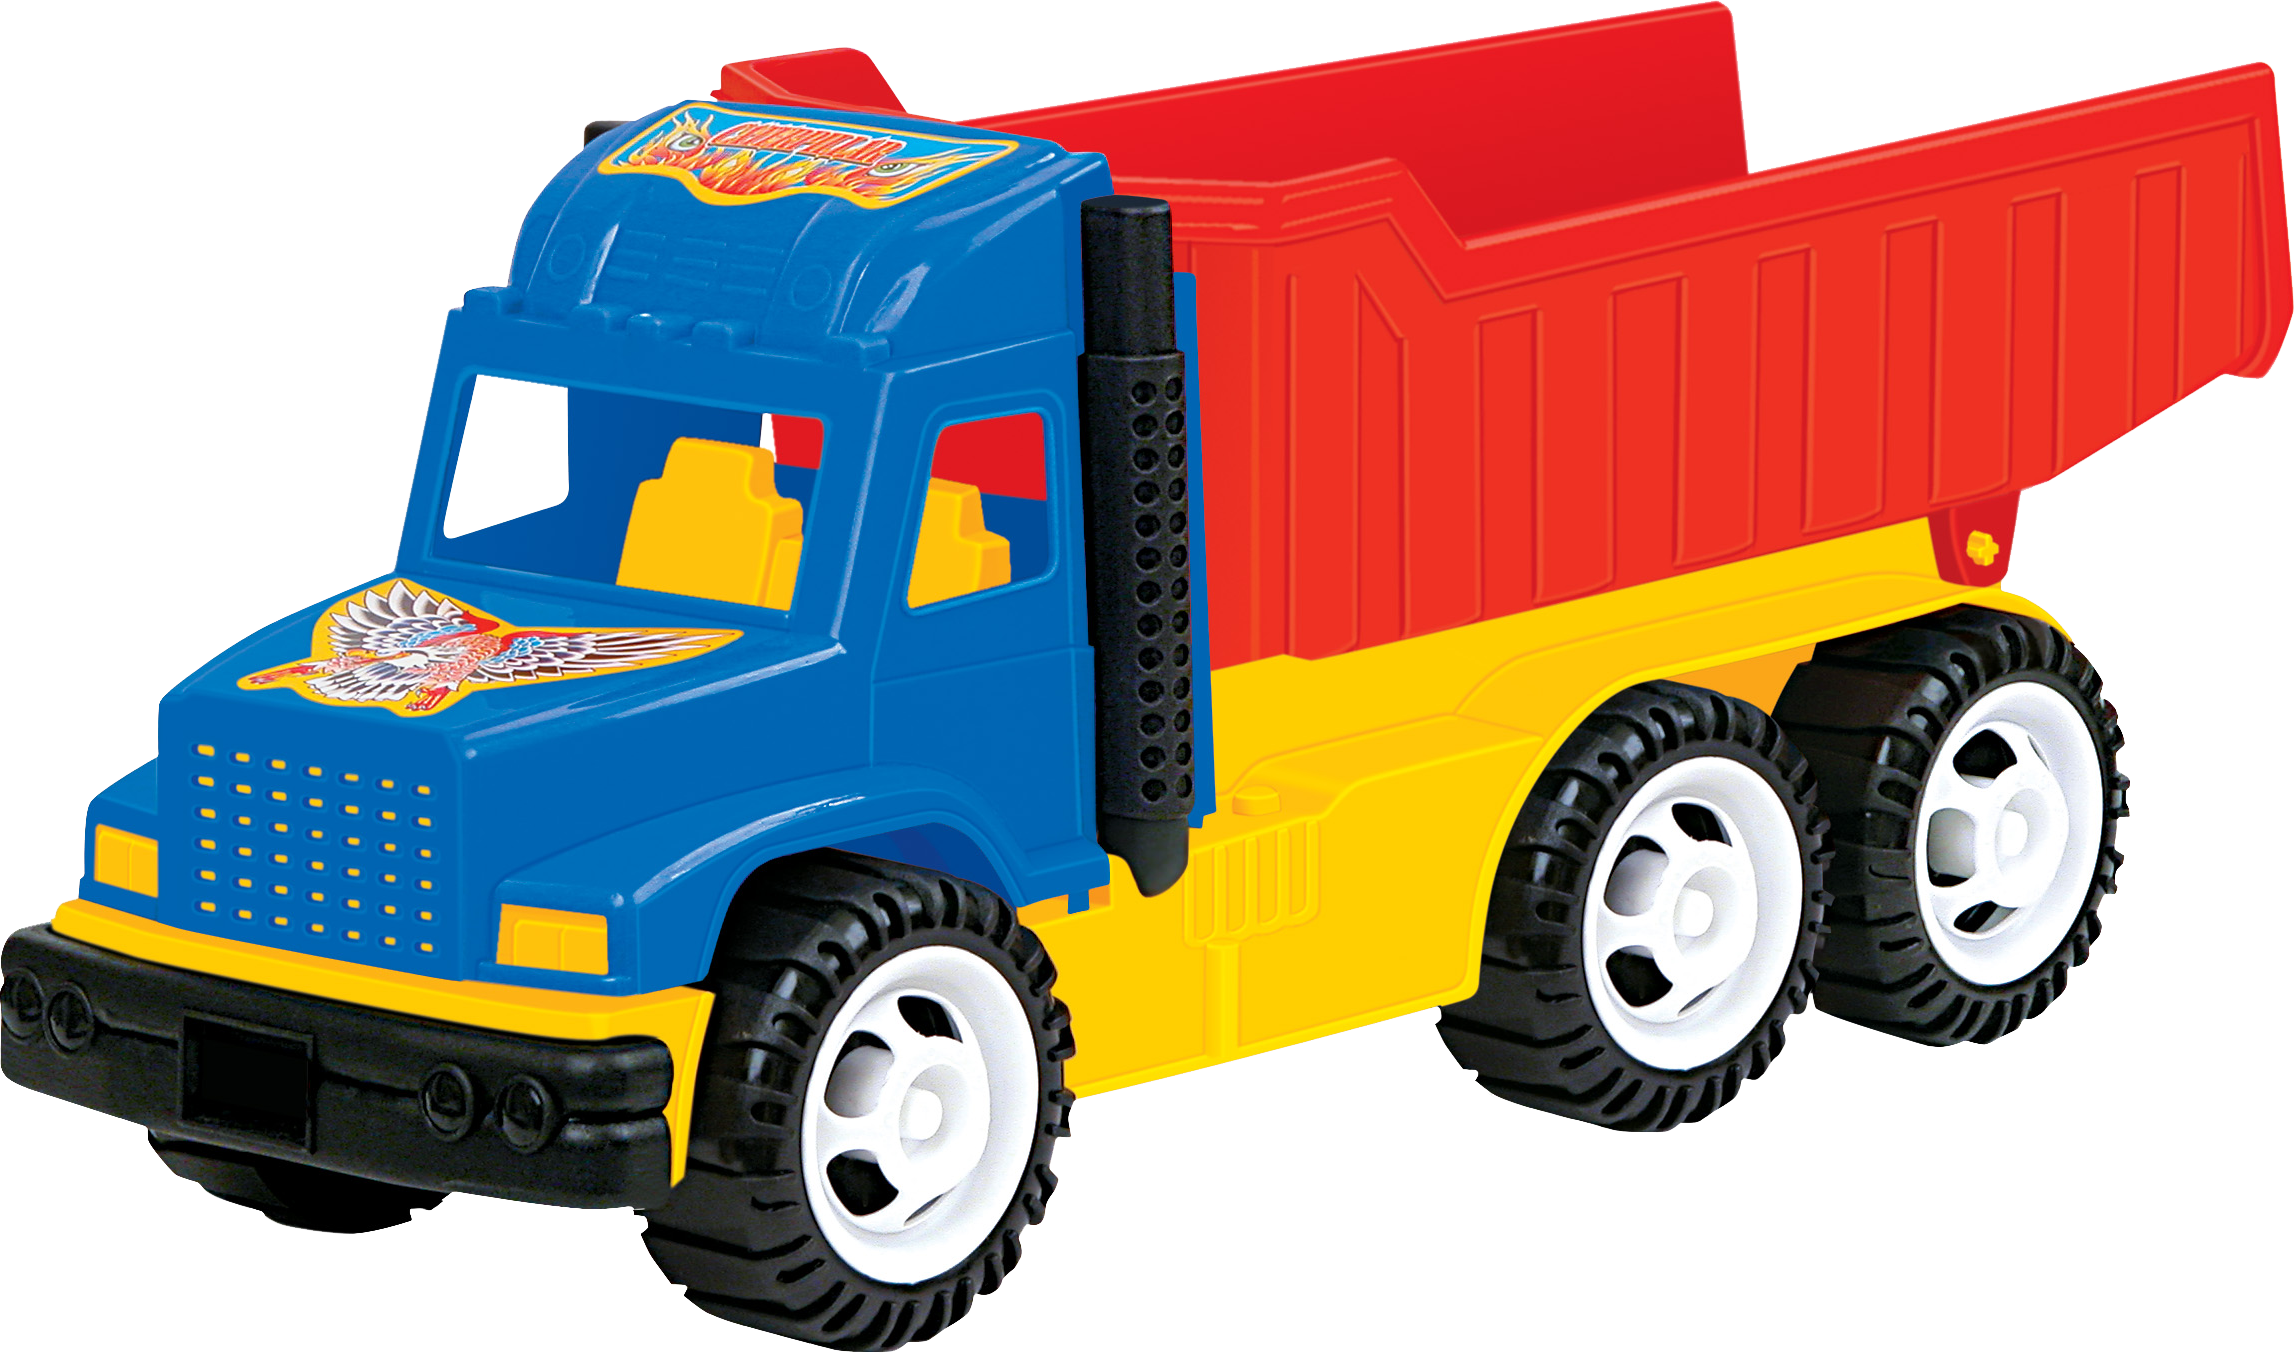 Model Car Toy Game Commercial Vehicle Clip Art - Клипарт Игрушек Пнг.